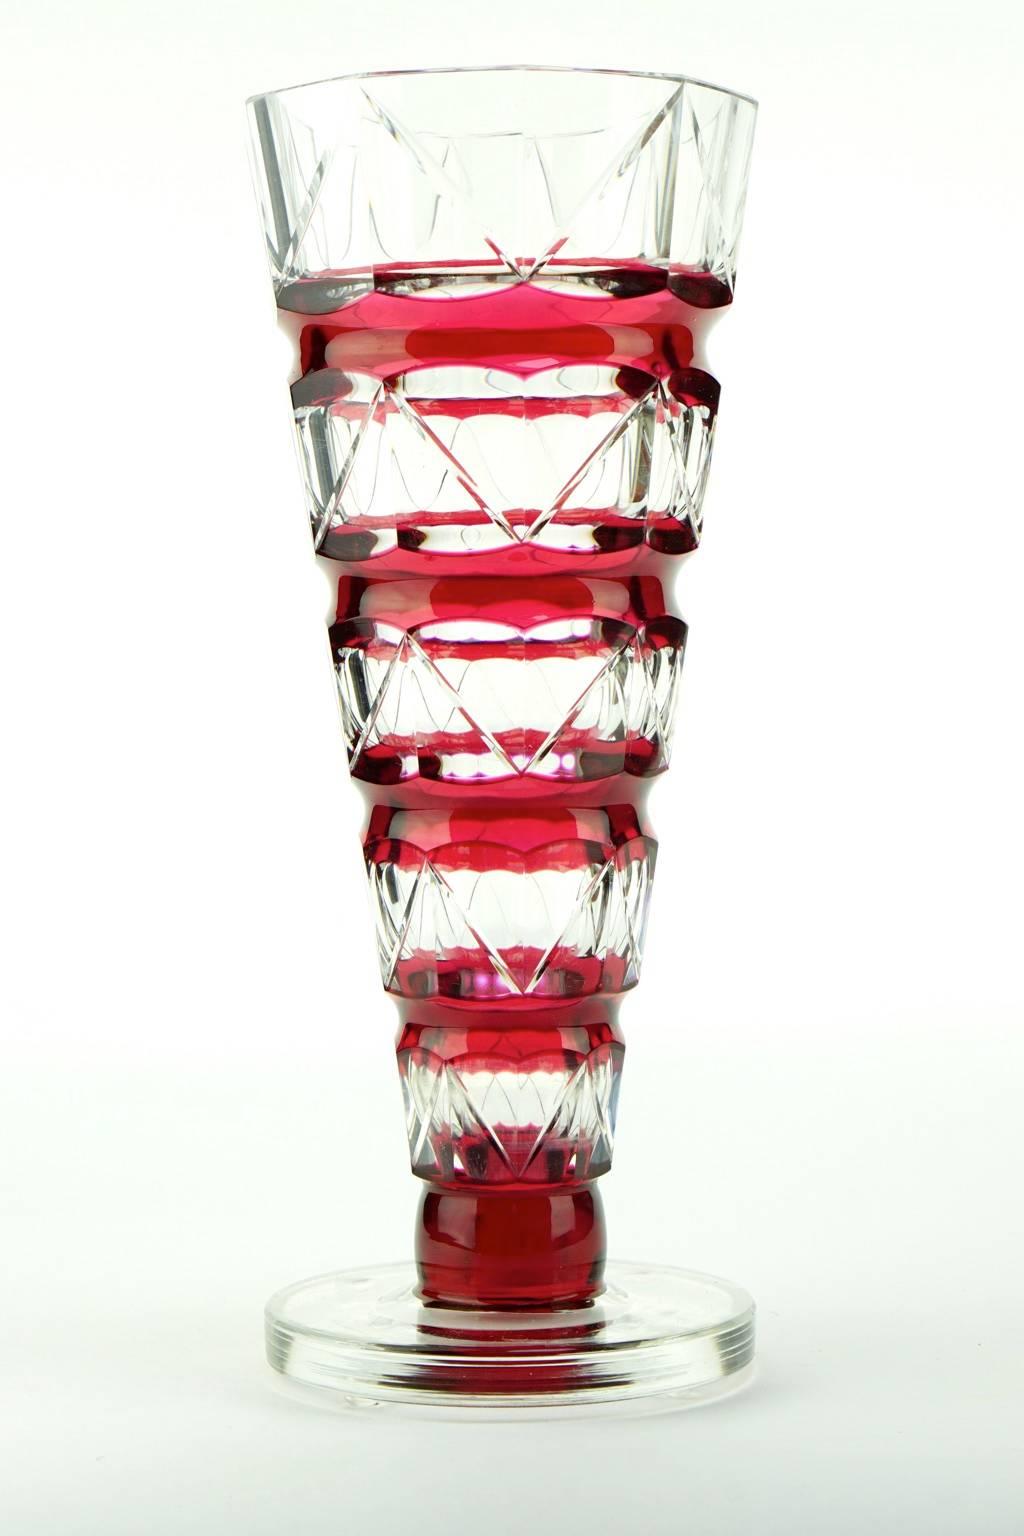 Art Deco slender vase in thick glass with flashed cherry color.
Circular seal of Val Saint Lambert.